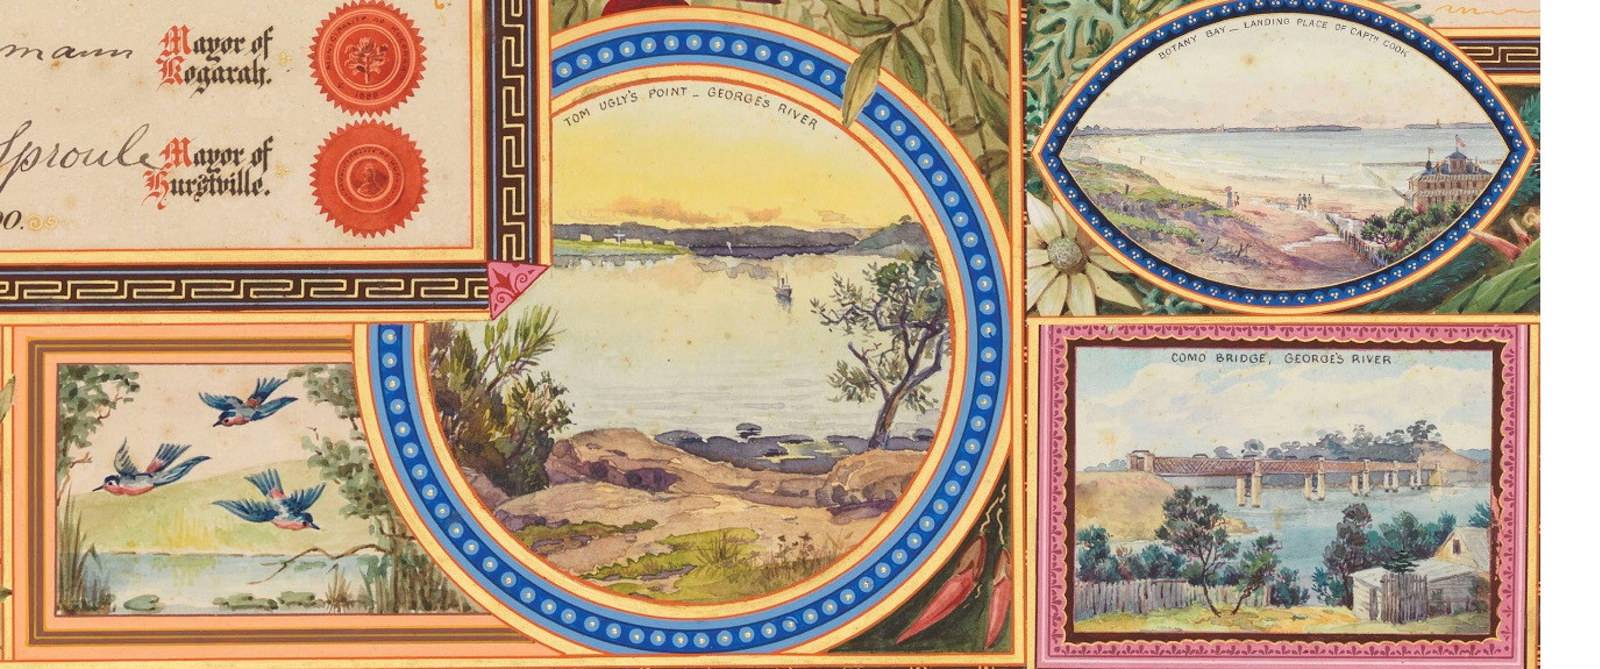 Paintings from the Lord Carrington Address showing landscape and local fauna vignettes